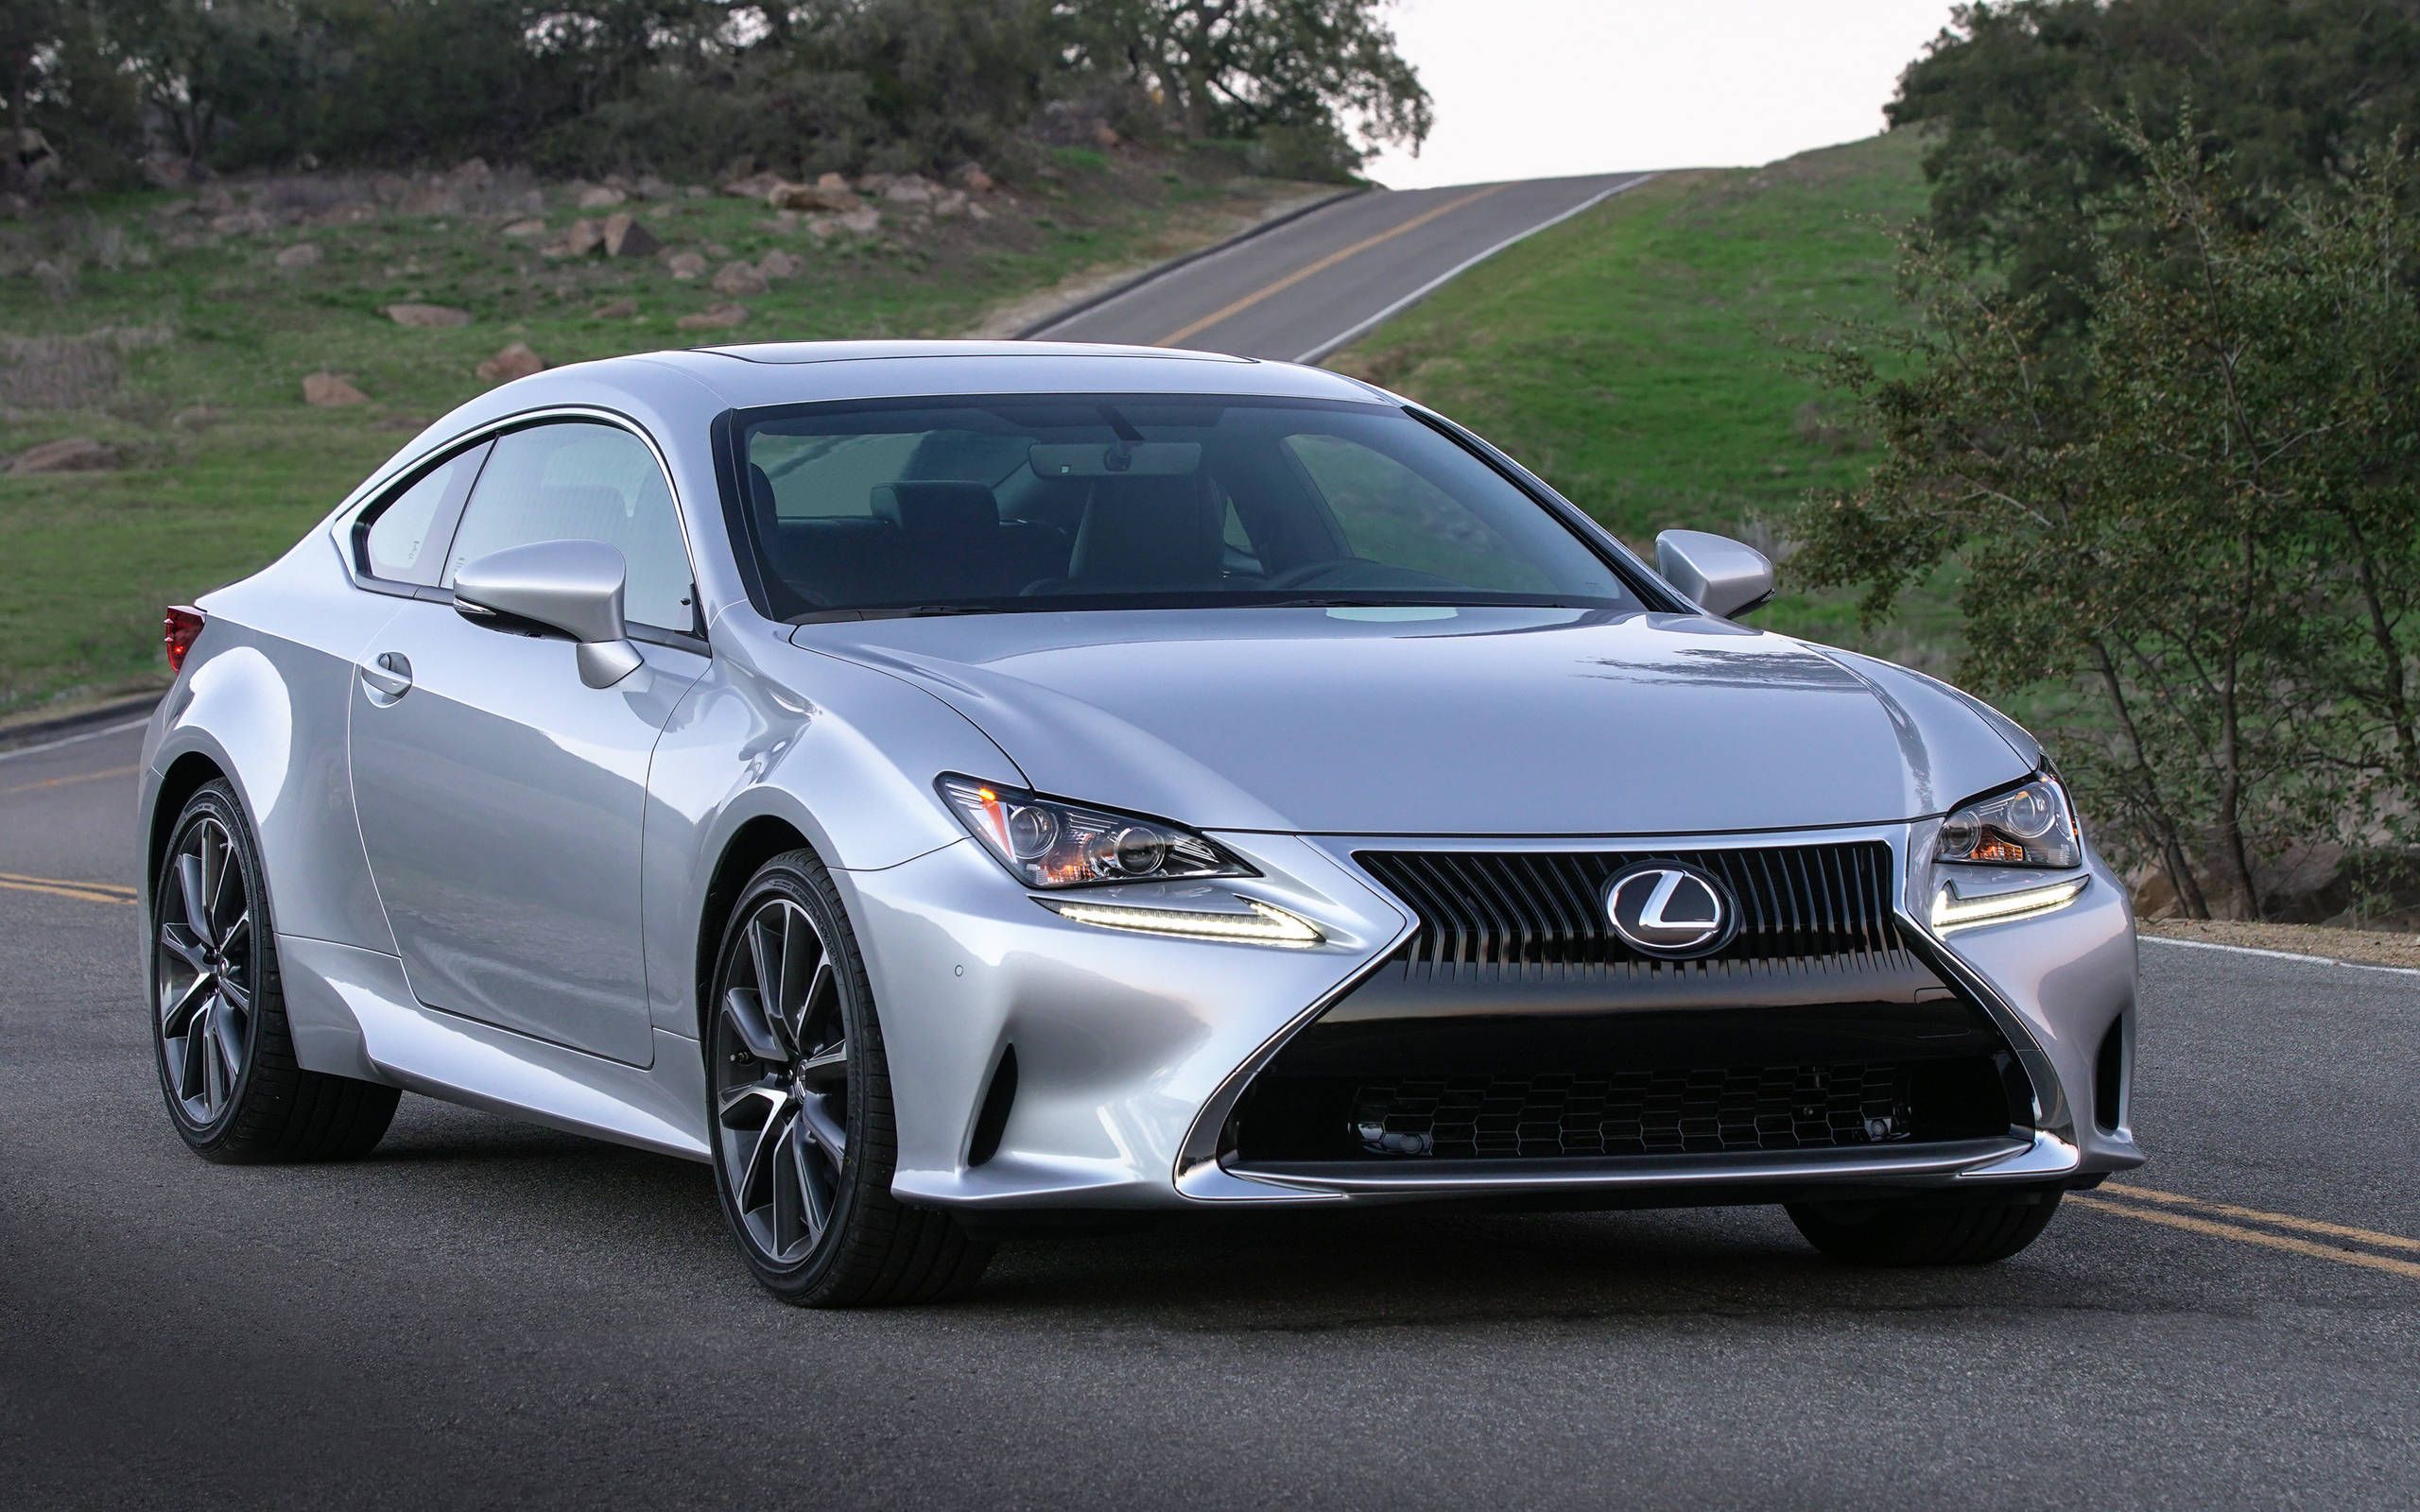 17 Lexus Rc0t Review When You Want To Look Fast